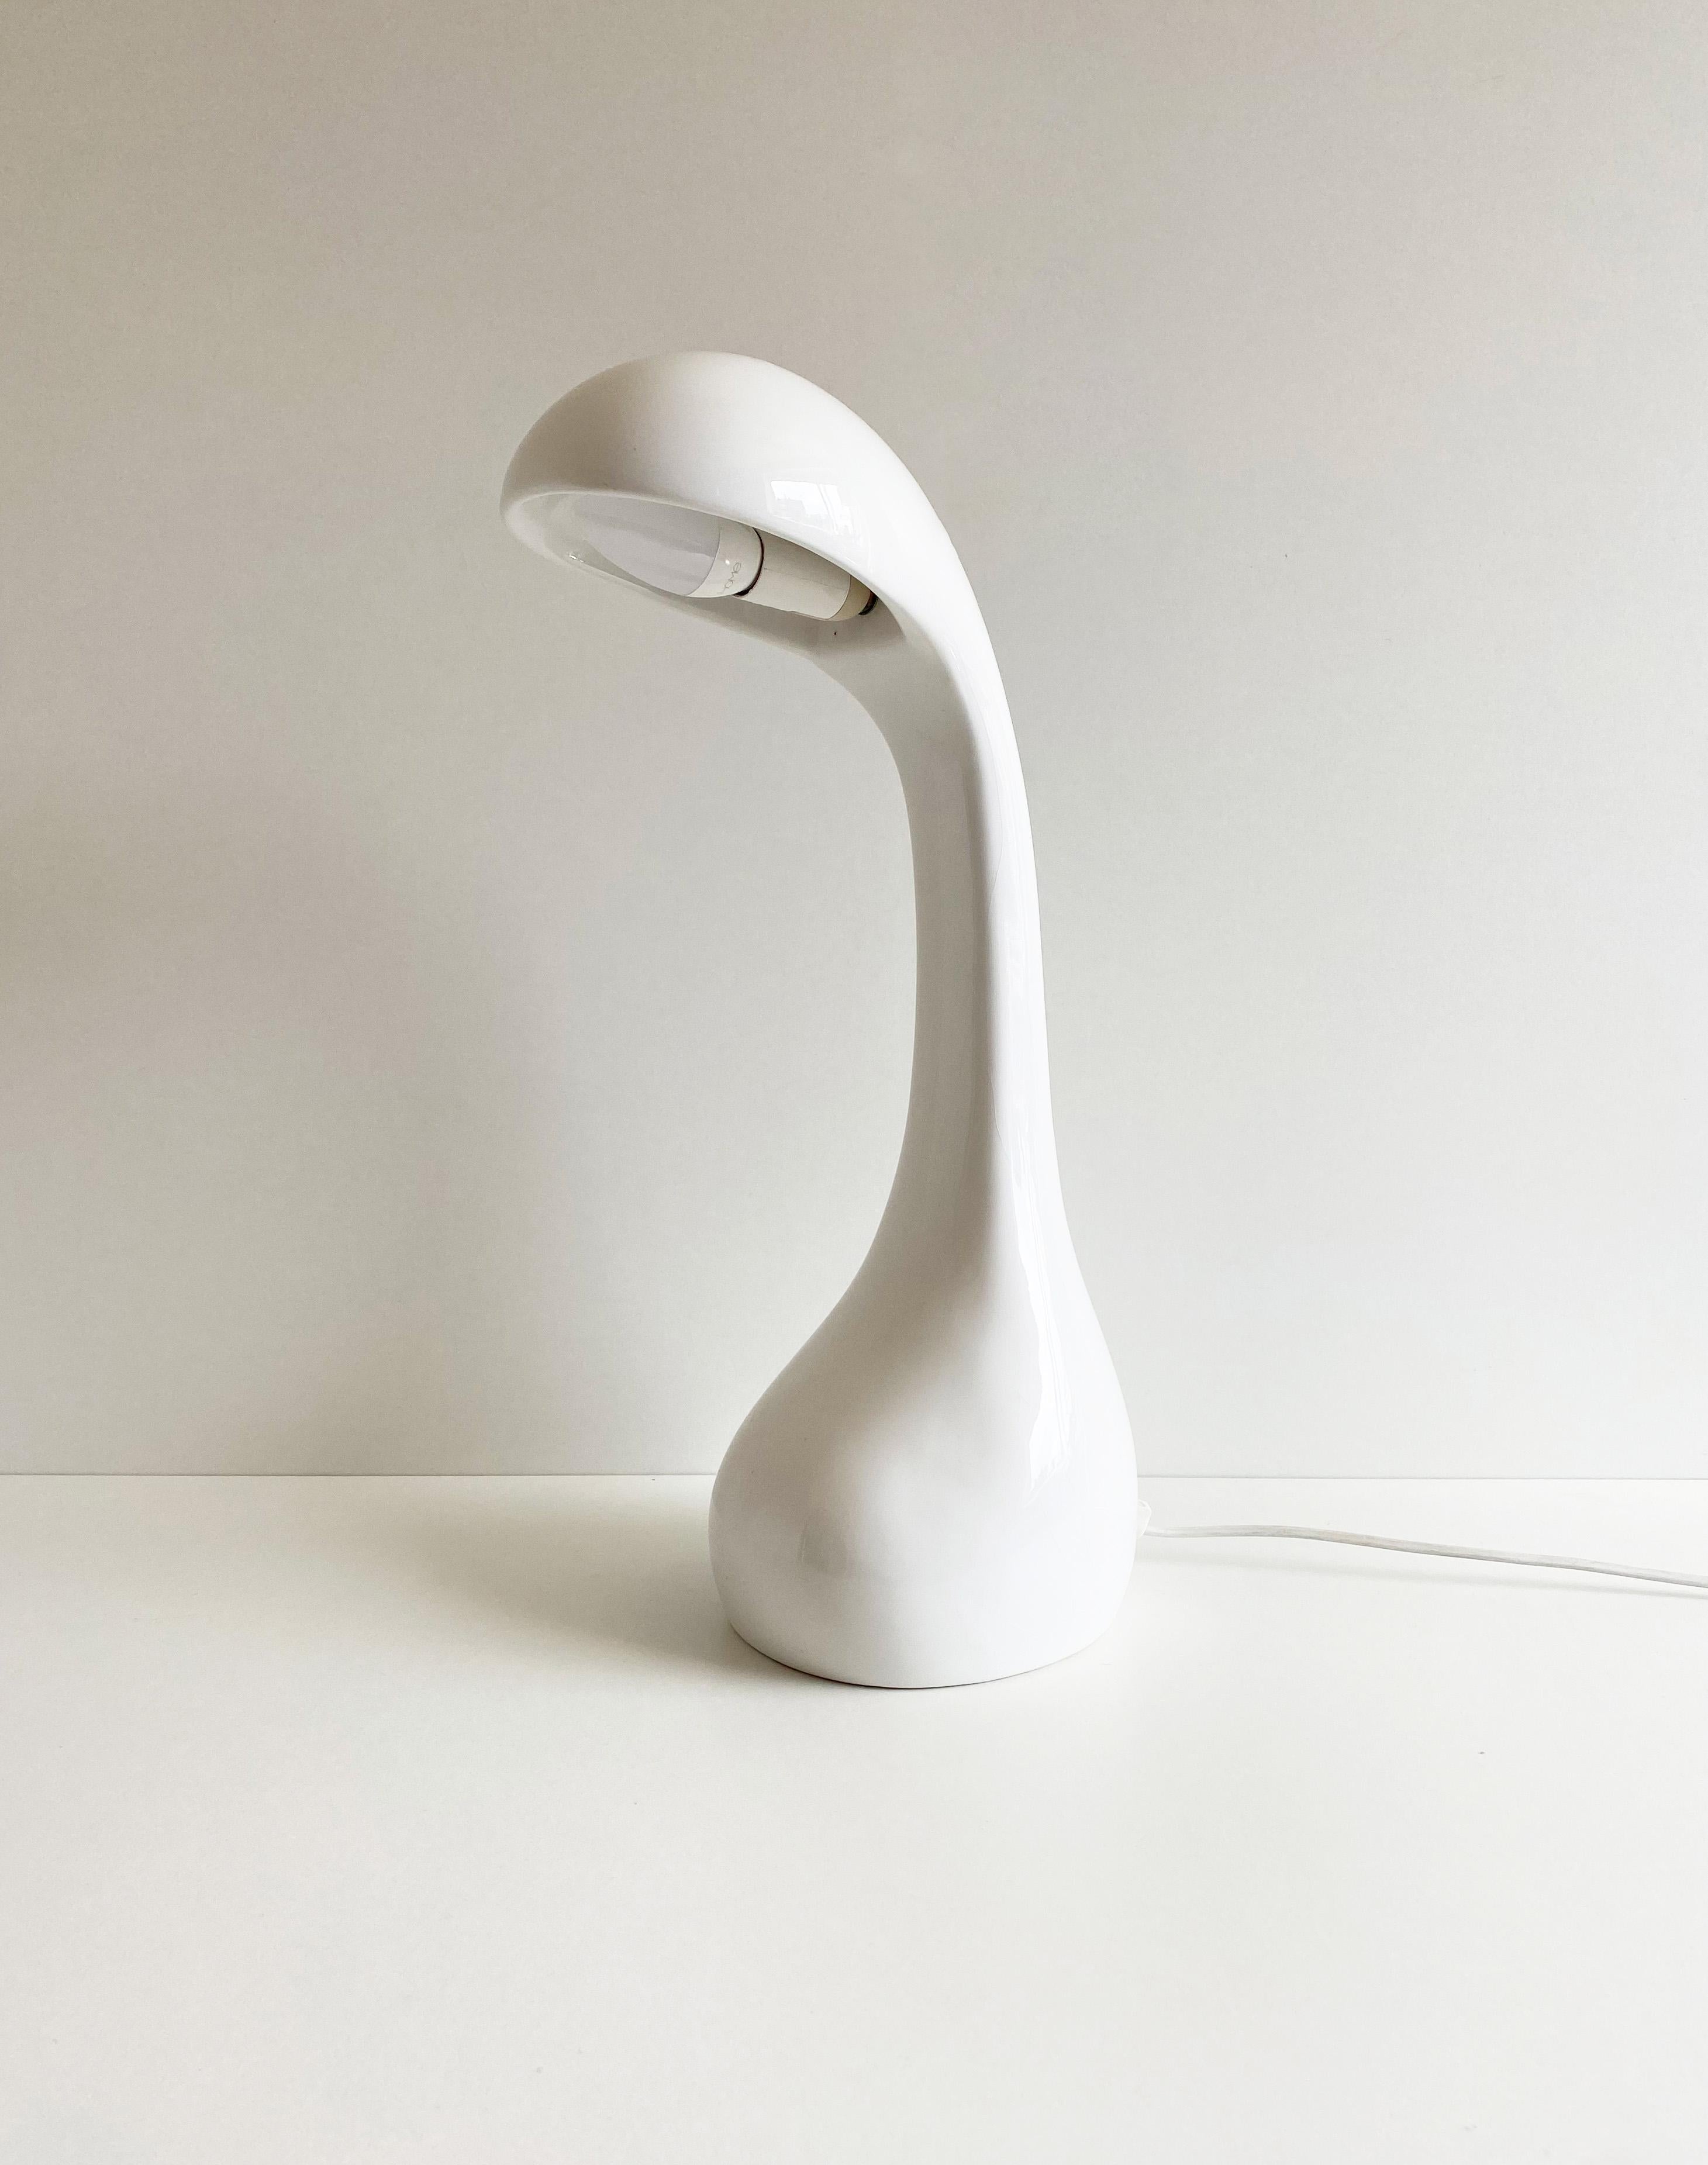 Tall white glazed earthenware desk lamp from the 1960's.

Dimensions (cm, approx): 
Height: 49 
Width: 18 
Depth: 30

Condition: Good condition for year with no cracks or chips but minor imperfections to the glaze. Please enquire for further